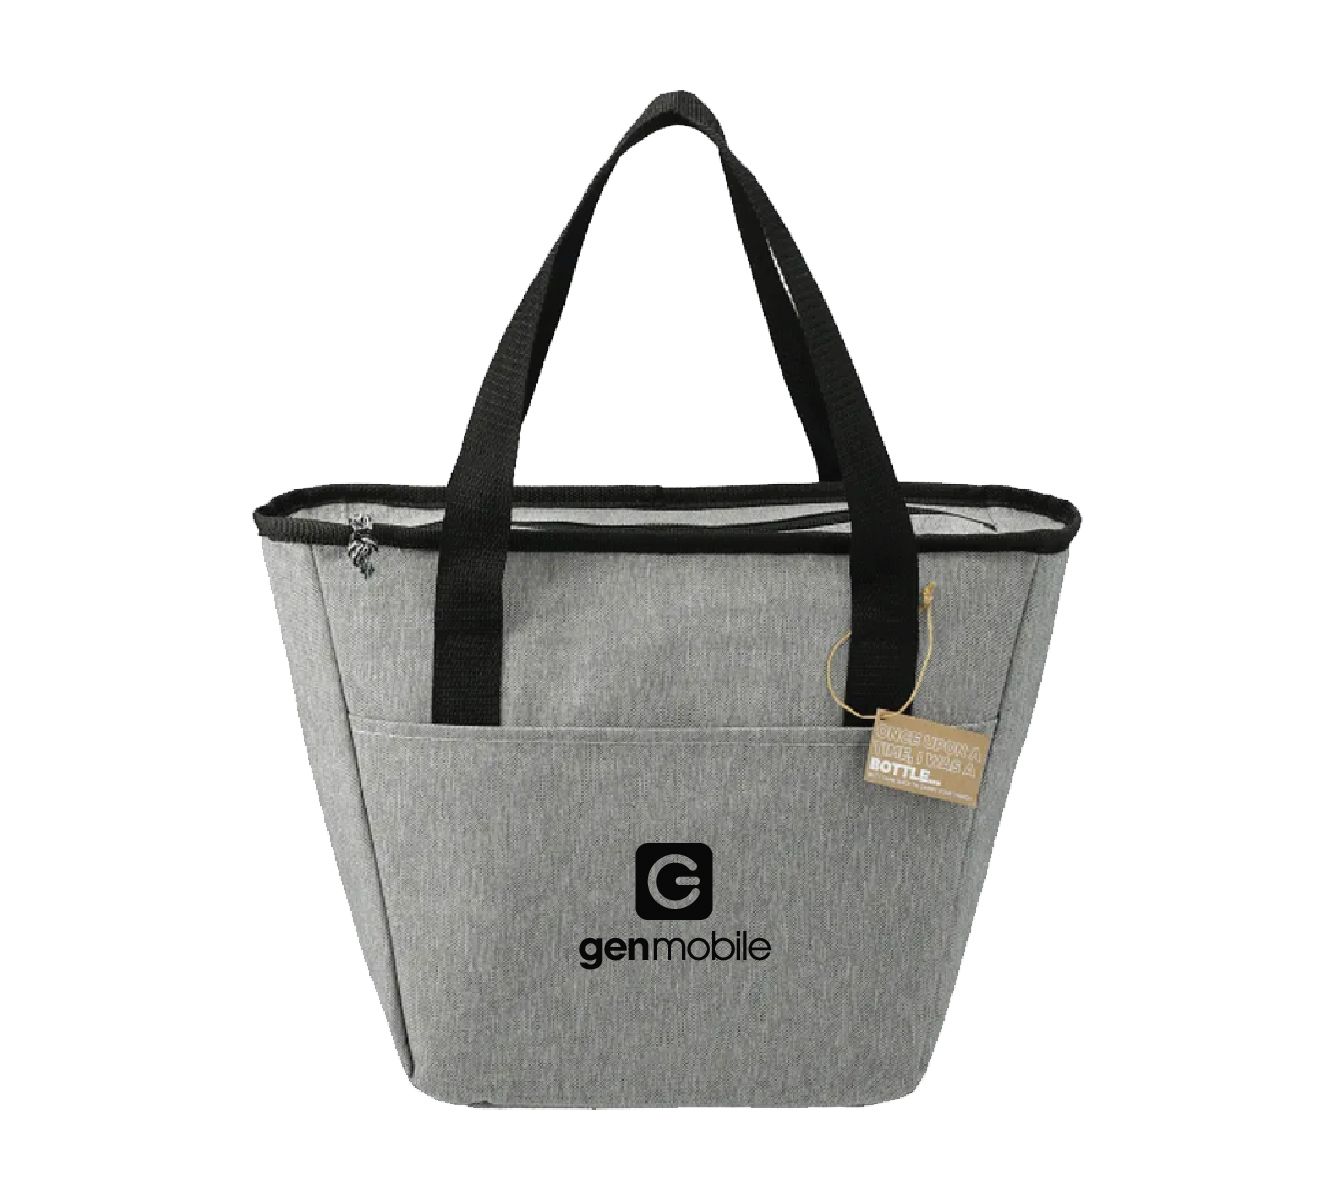 Merchant & Craft Revive Recycled Tote Cooler with Gen Mobile Logo